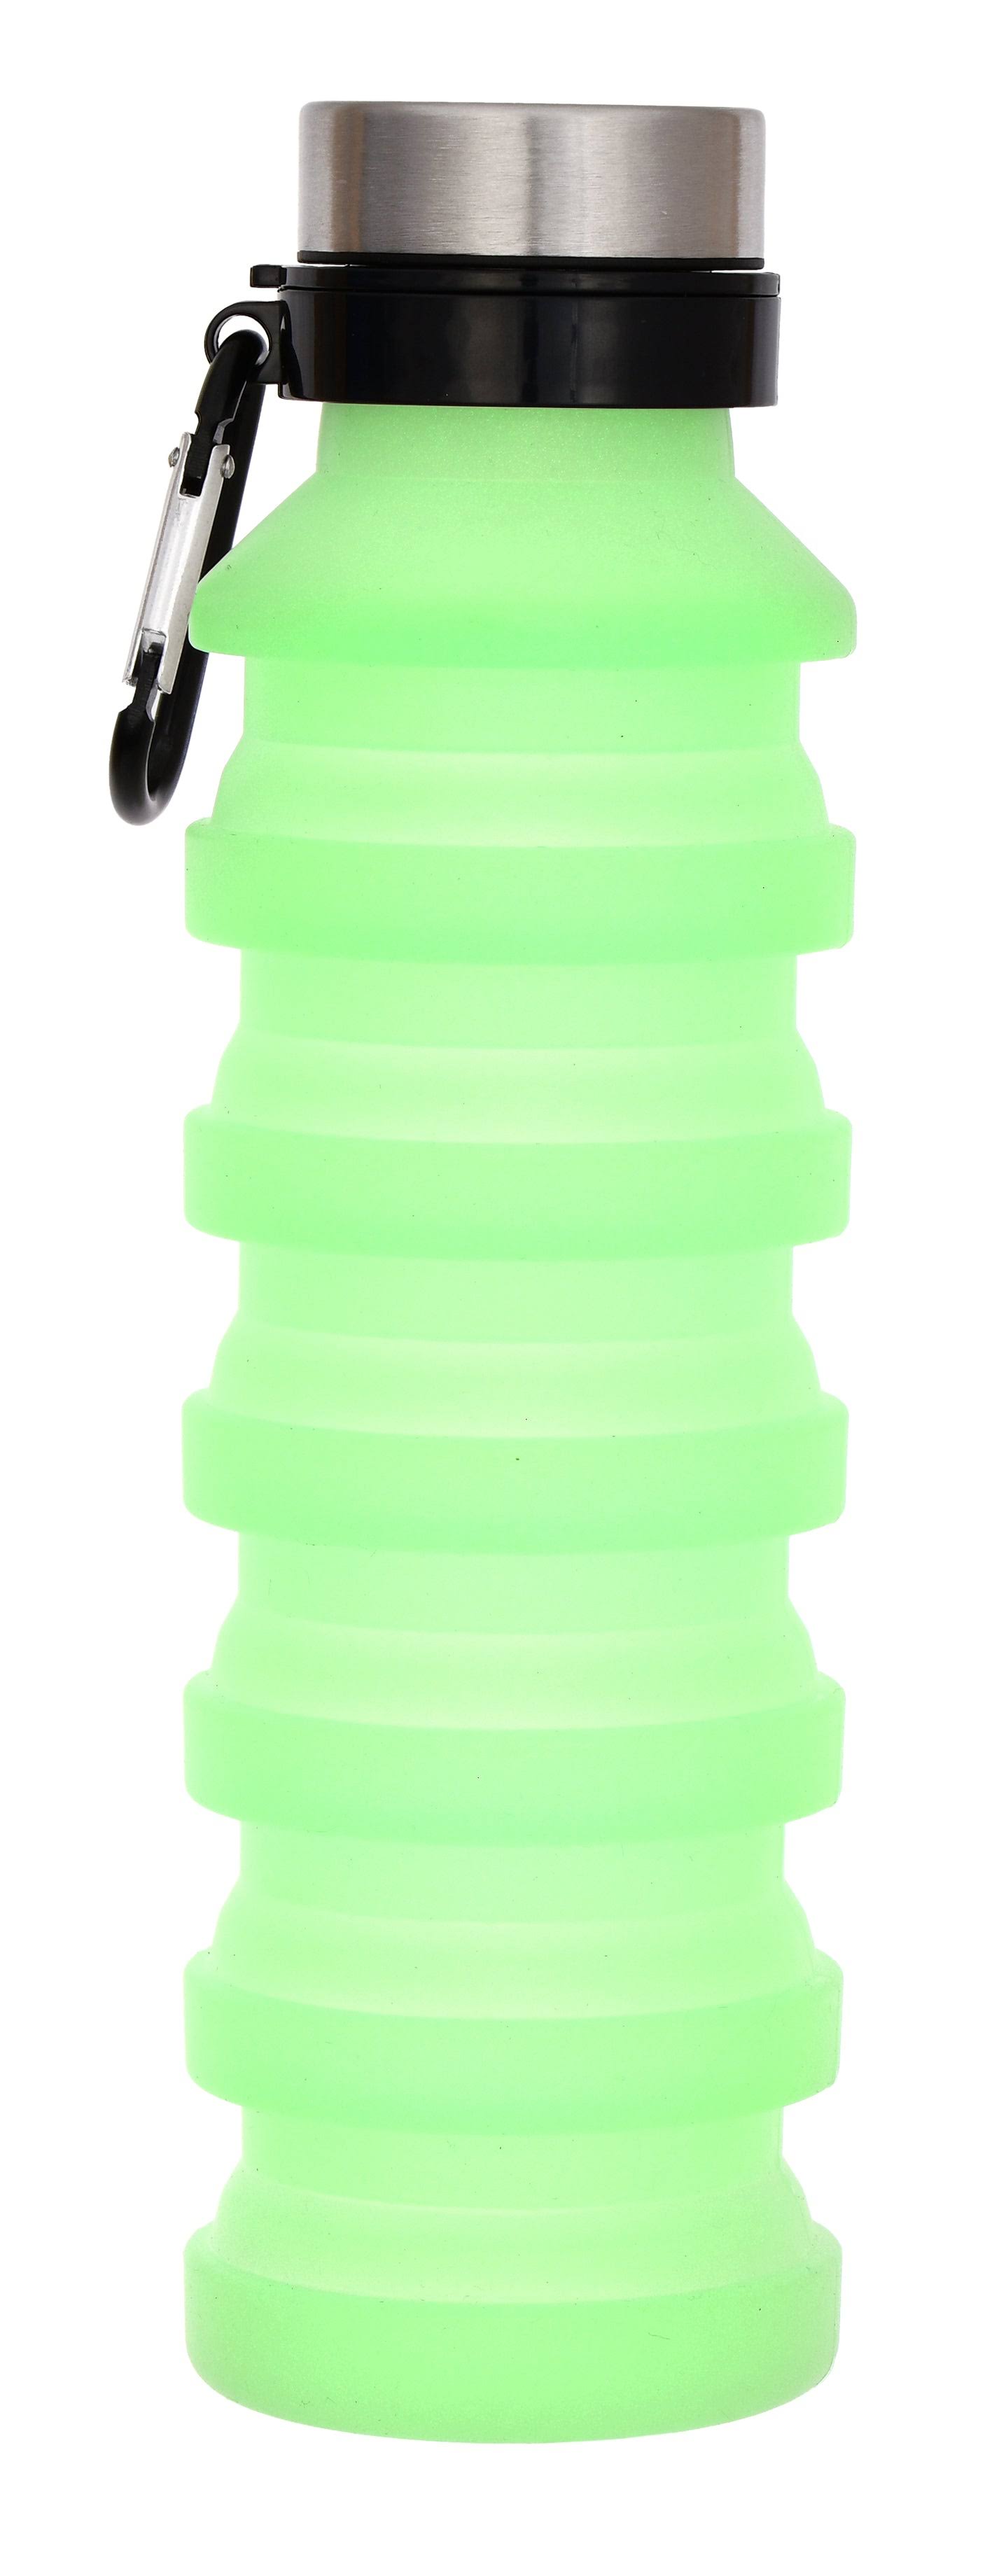 Iscream Glow in The Dark Silicone Collapsible Water Bottle